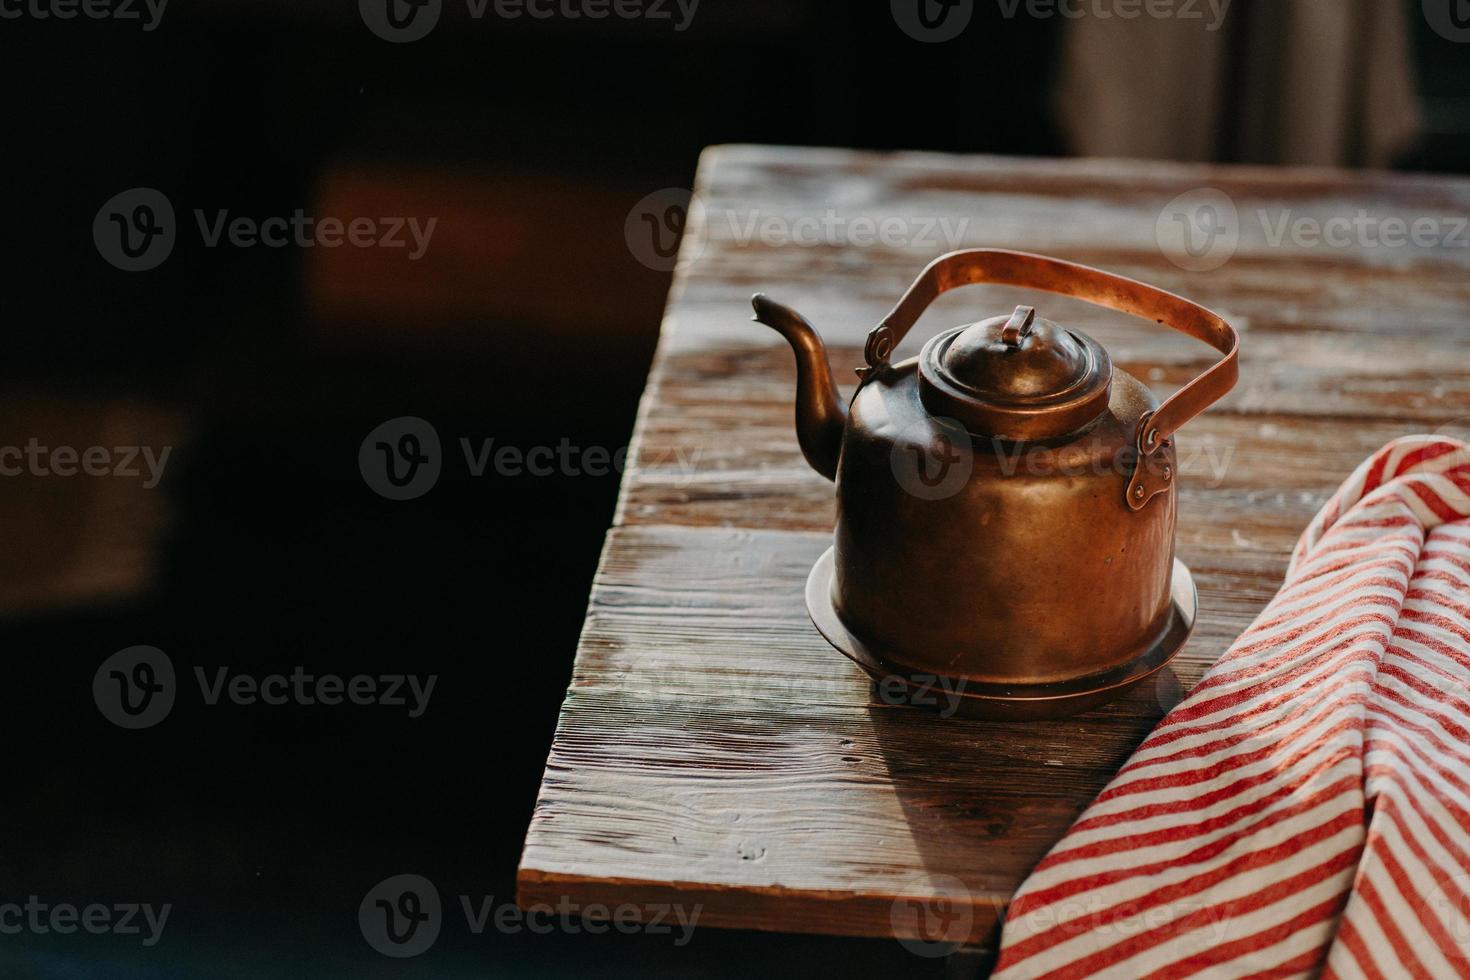 Old copper metal teapot on wooden table in dark room. Red striped towel nearby. Antique kettle for making tea or coffee. Cooking equipment photo